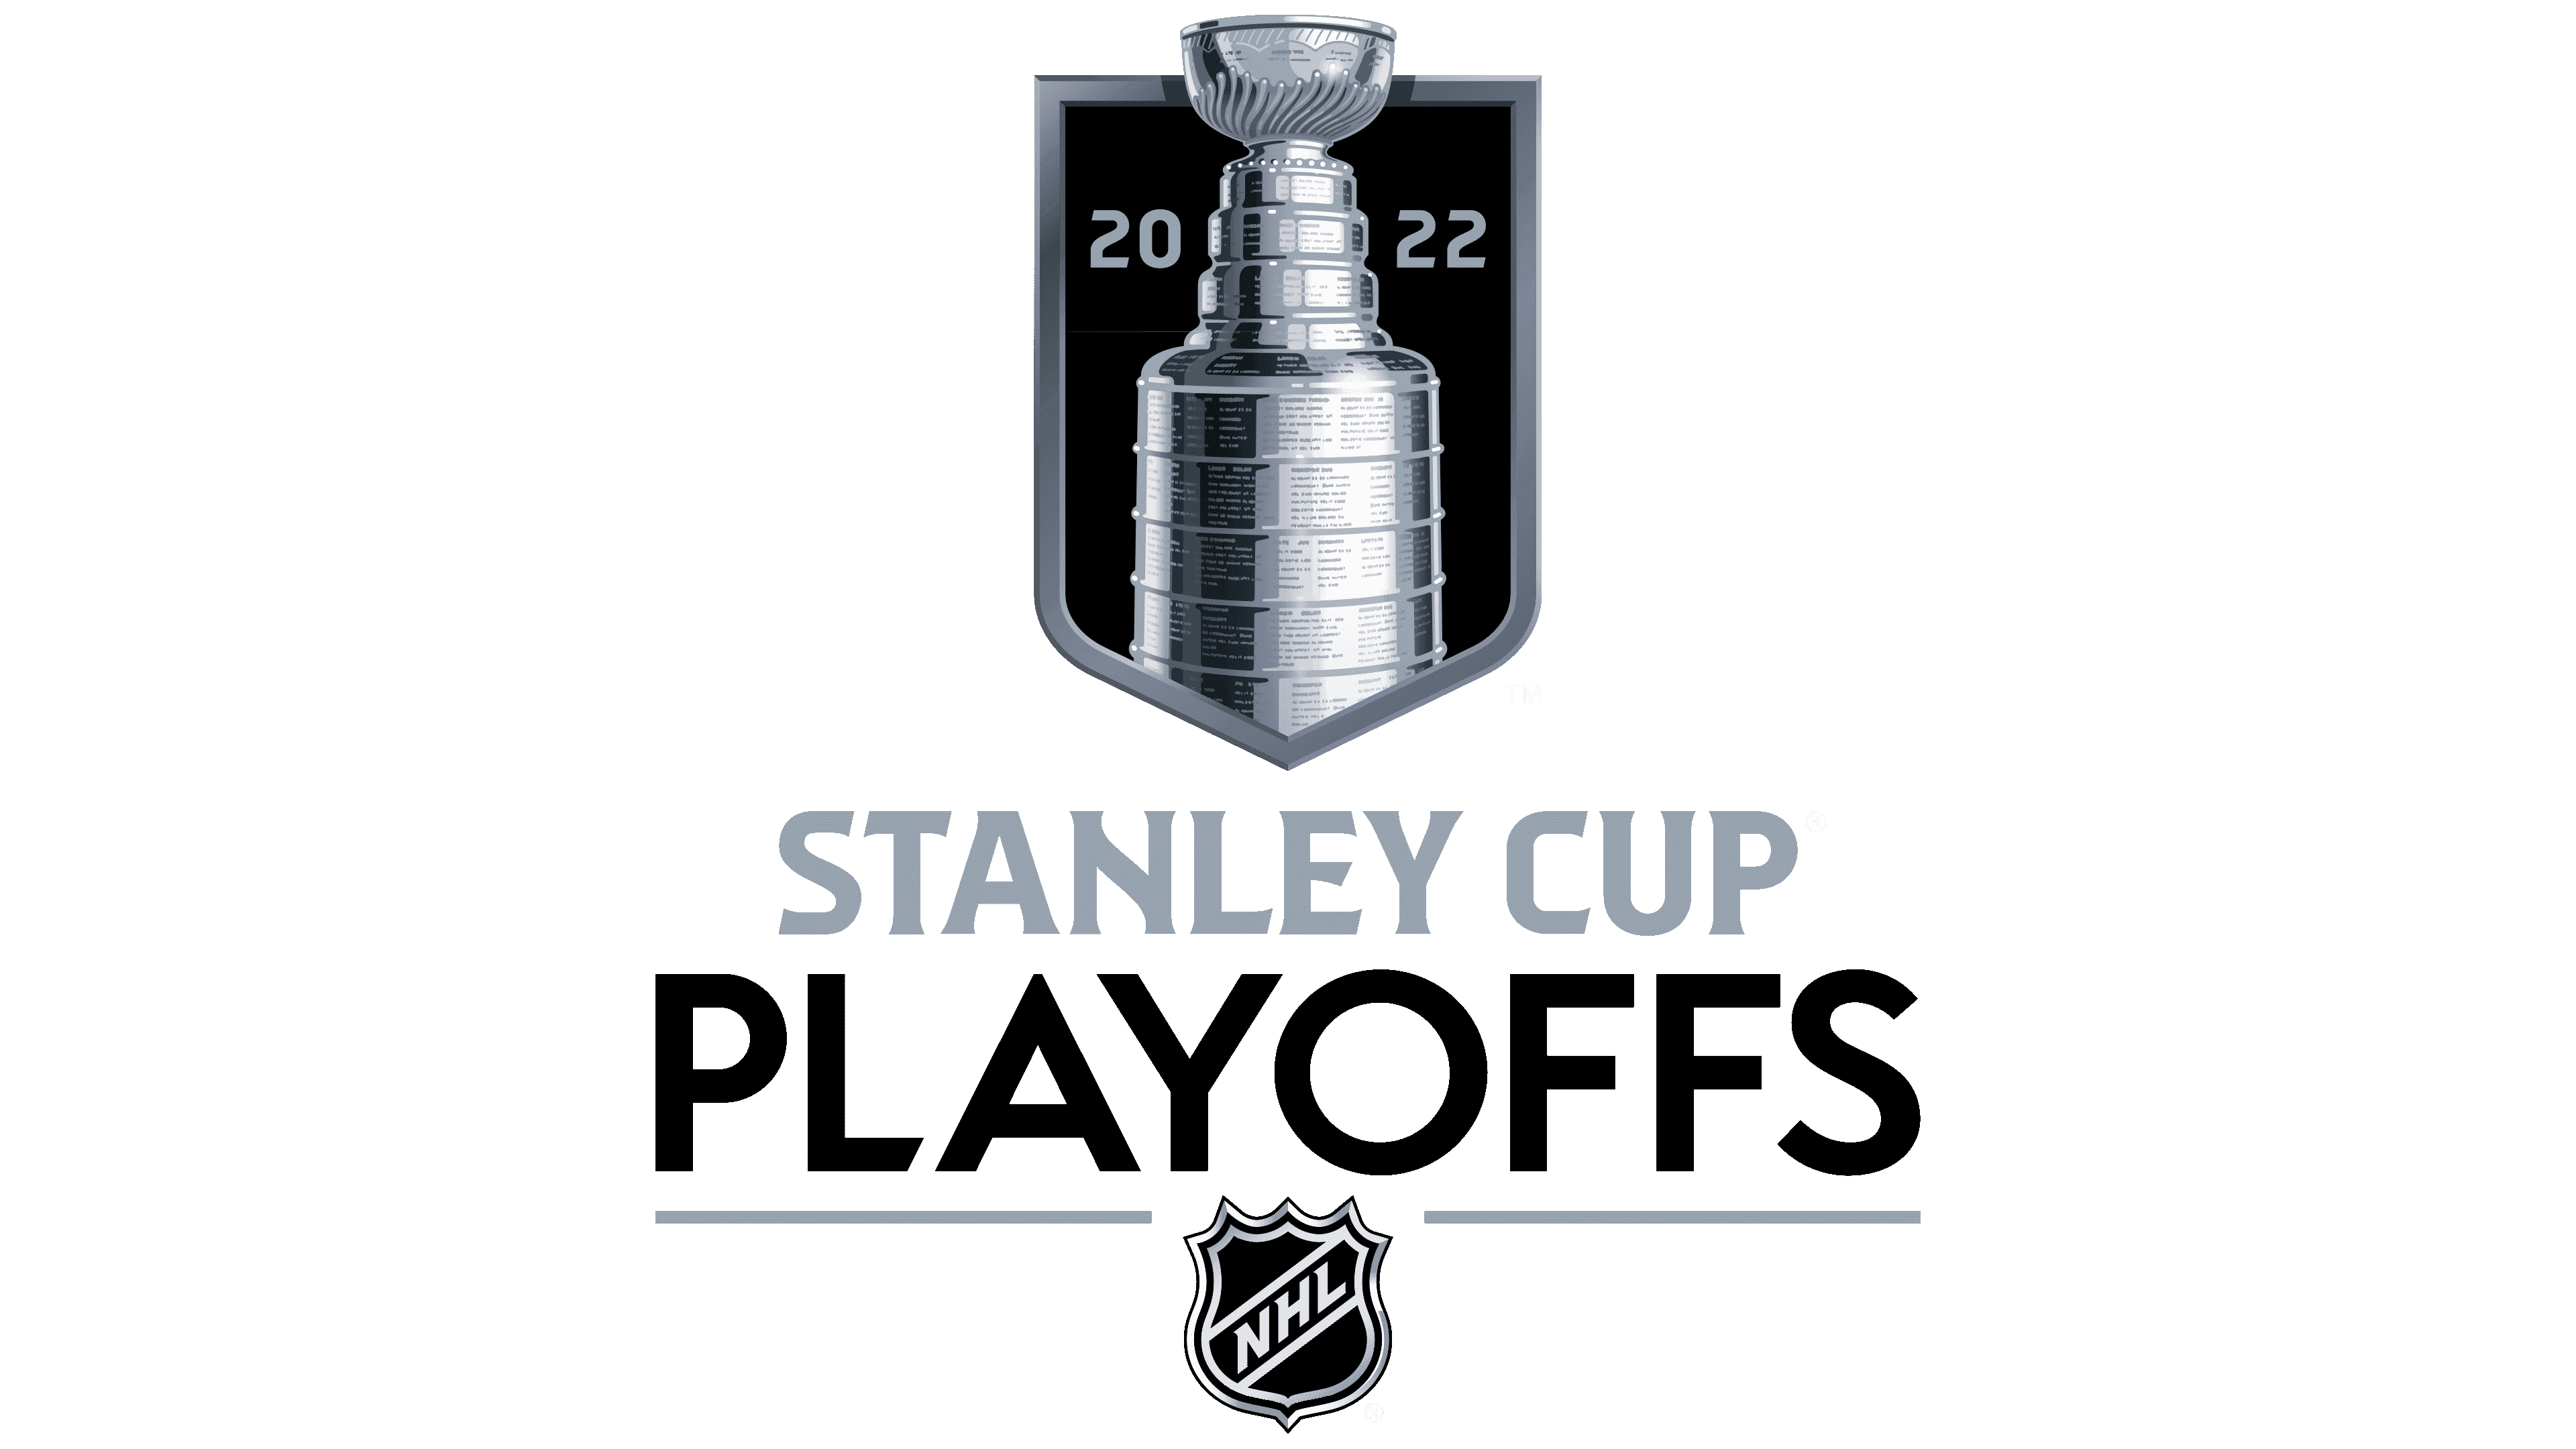 Stanley Cup Playoffs have a new logo system